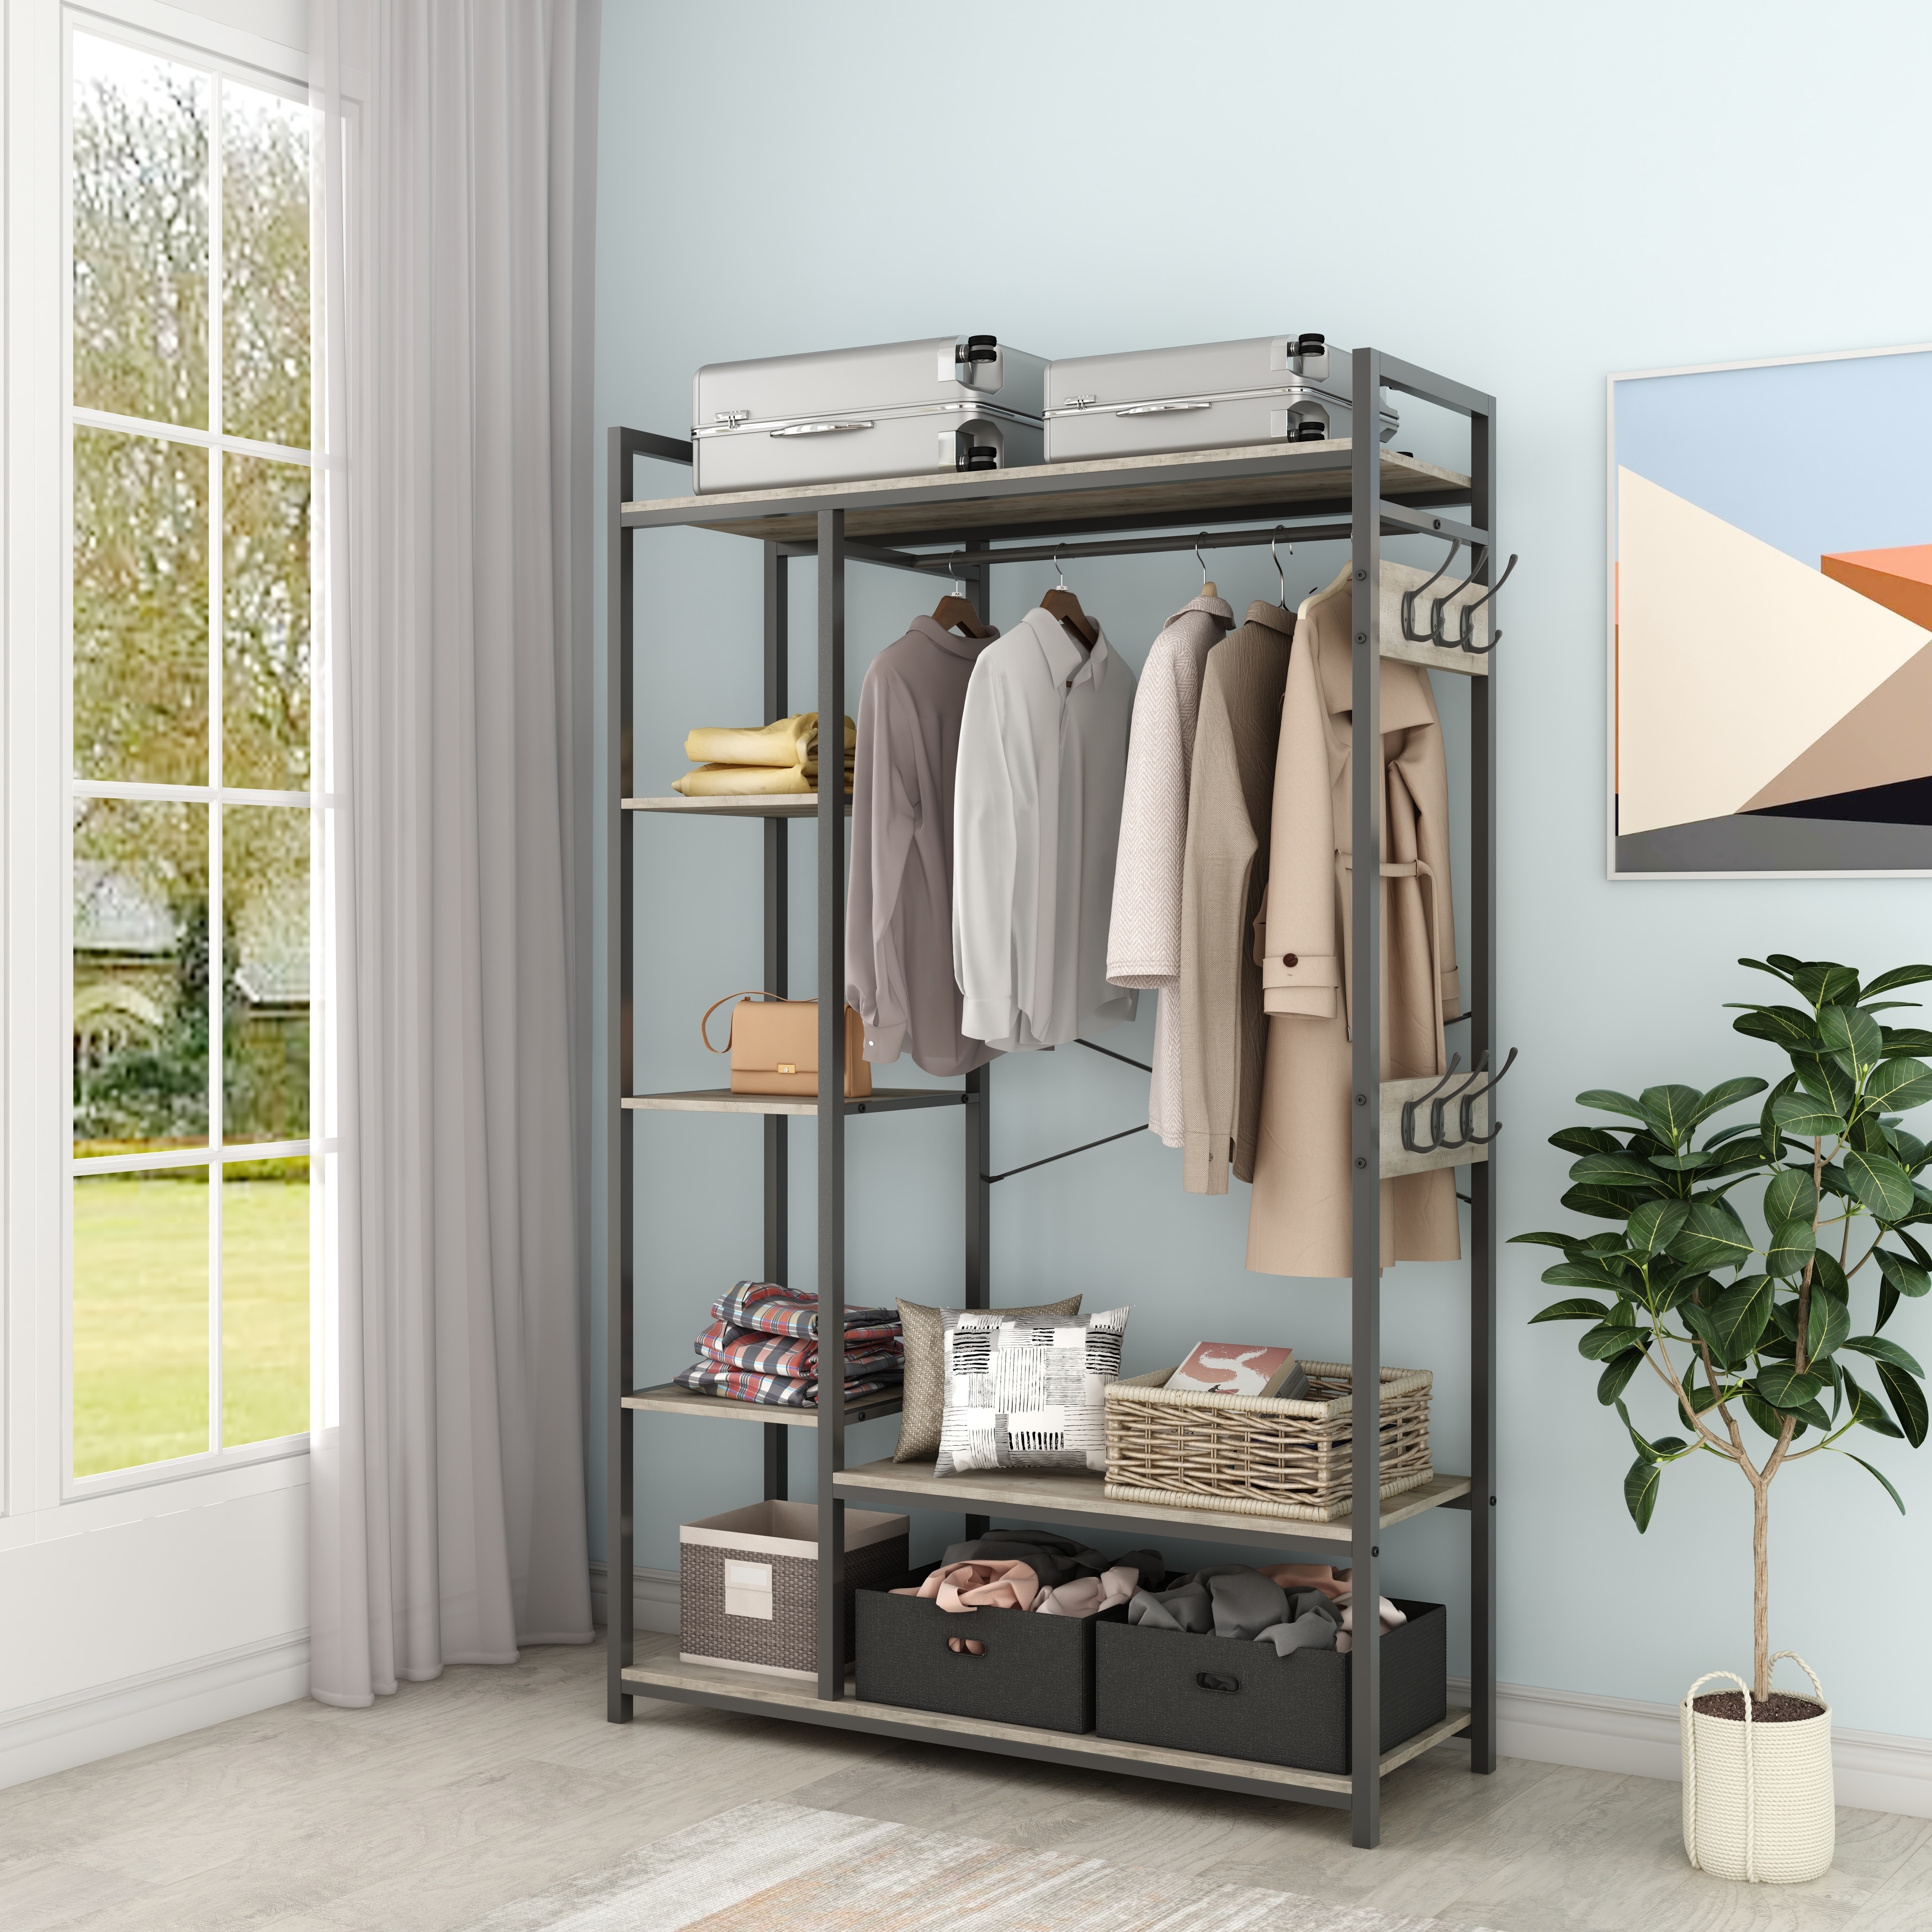 https://ak1.ostkcdn.com/images/products/is/images/direct/de27d465678a56e5125a7e94a052c7233d1f16a1/Free-Standing-Closet-Organizer%2C-Portable-Garment-Rack-with-Open-Shelves-and-Hanging-Rod%2C-Black-Metal-Frame.jpg